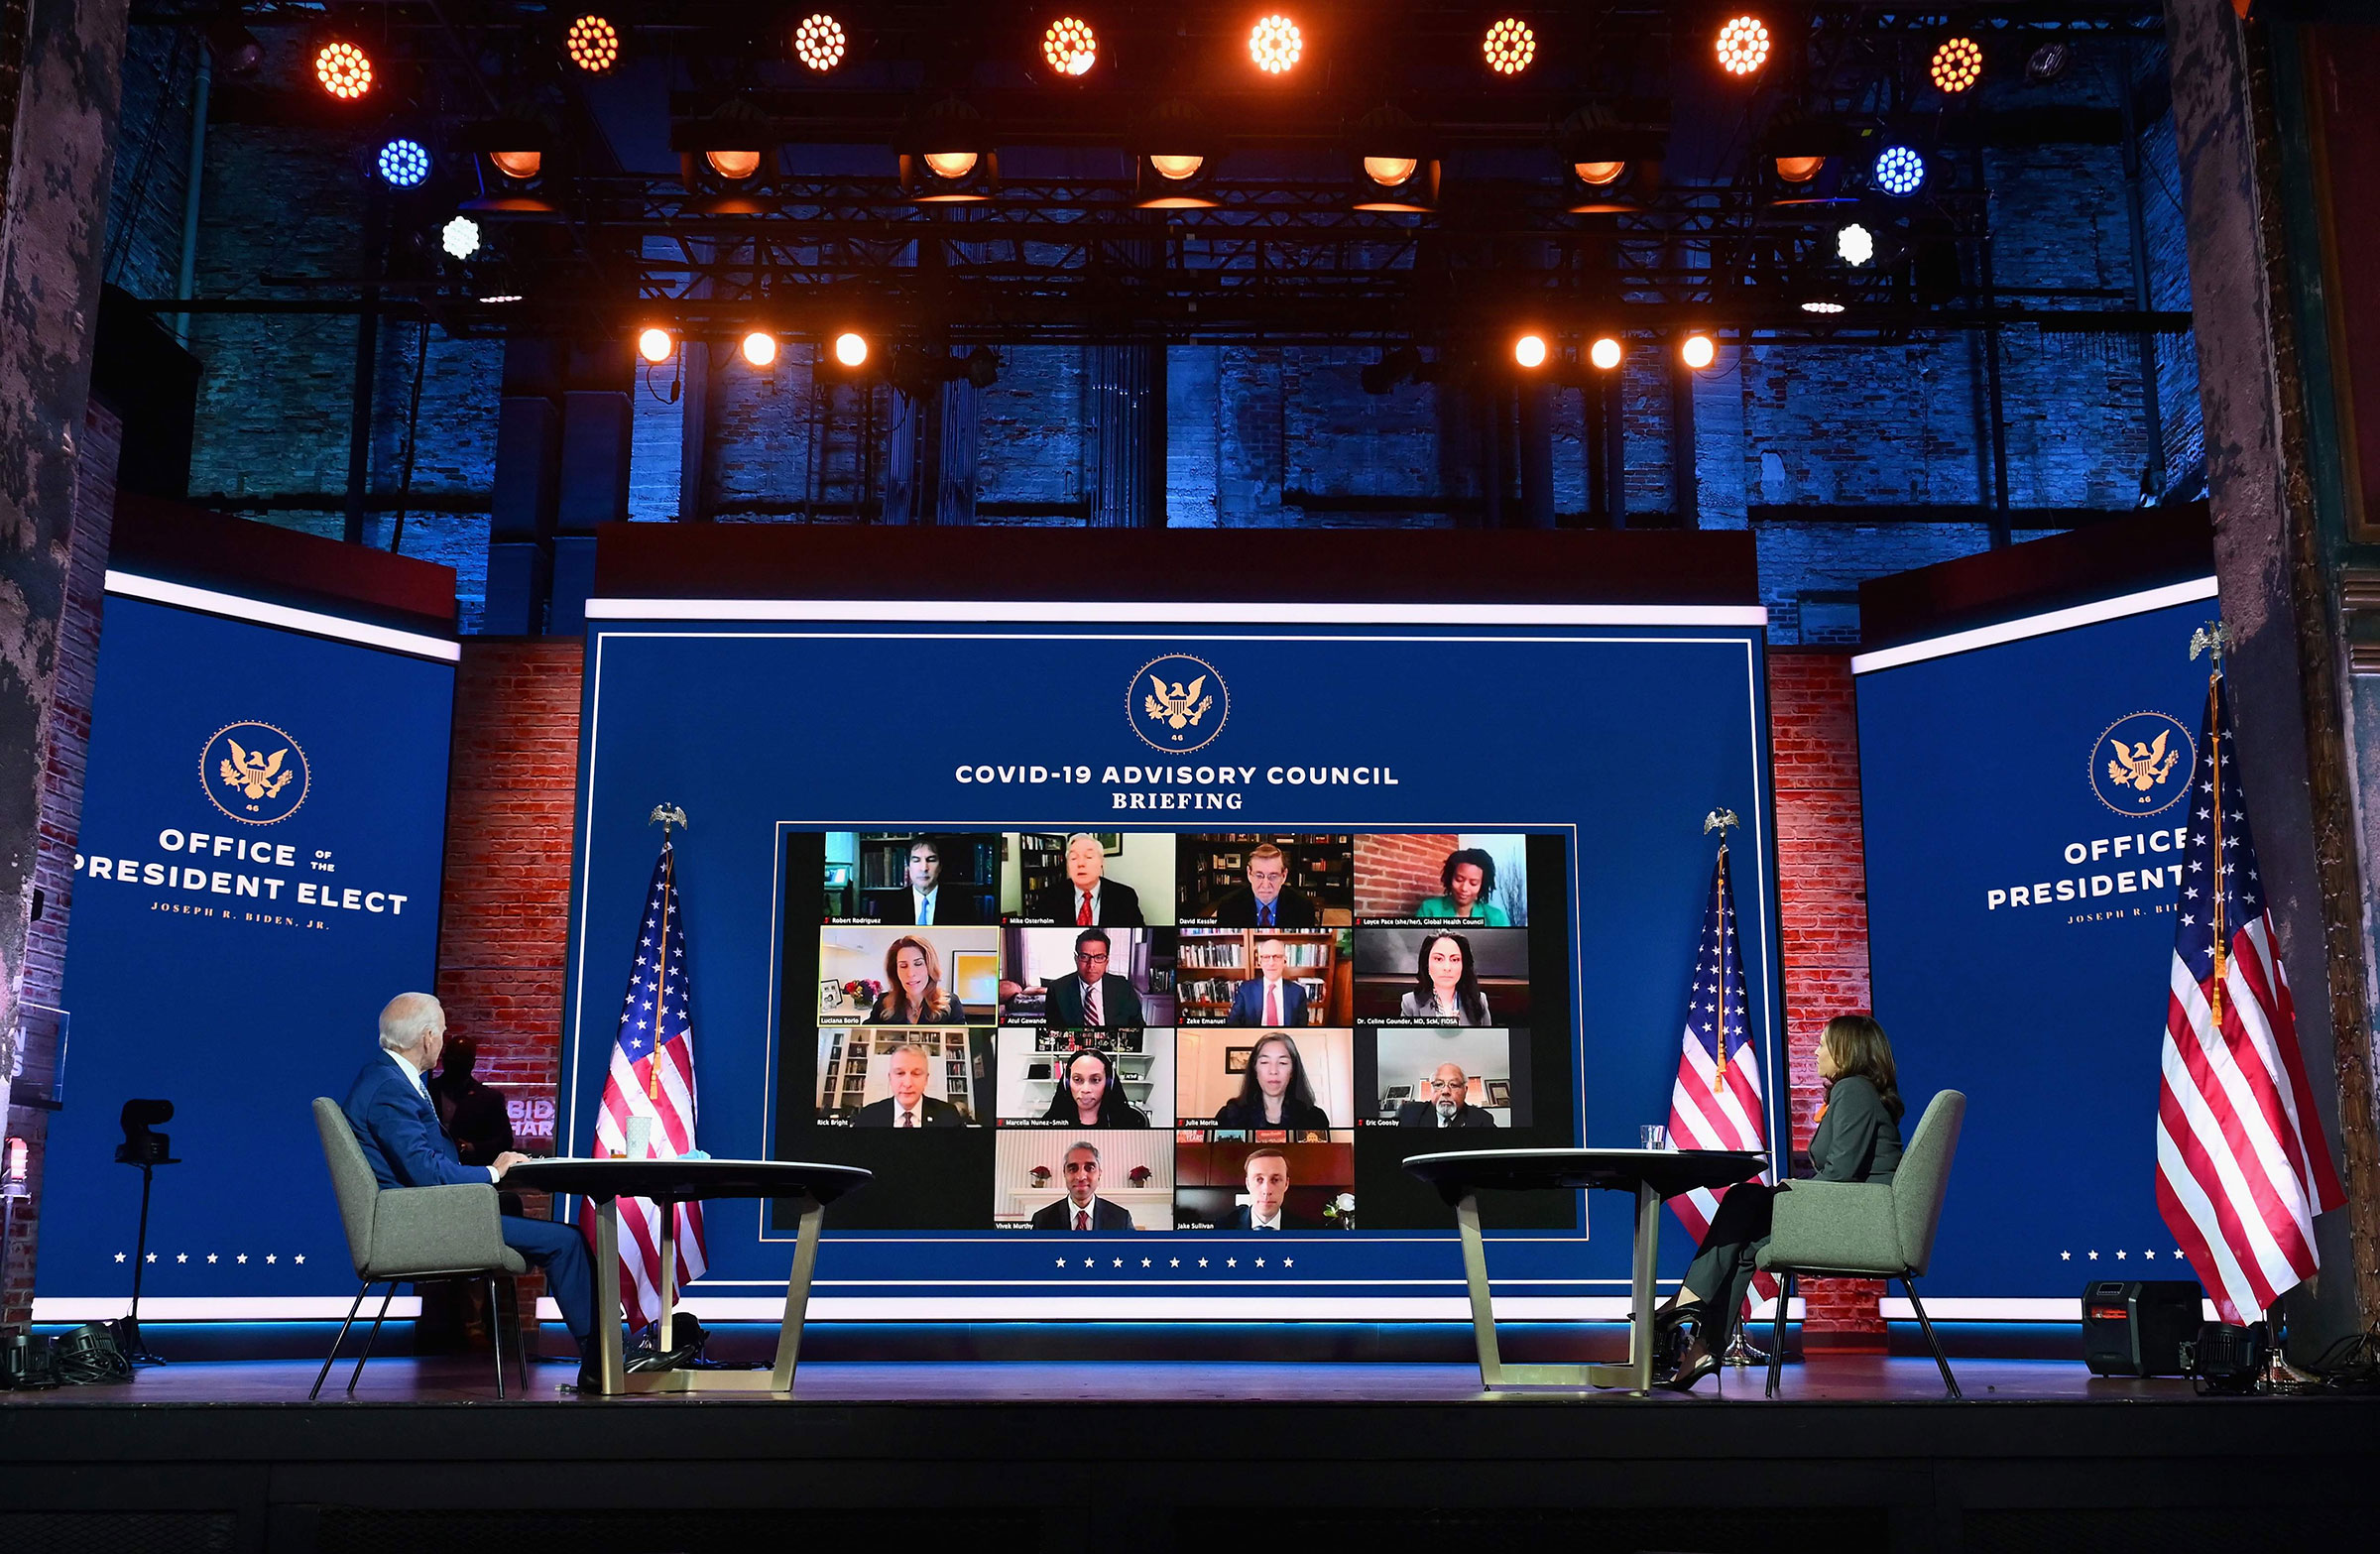 President-elect Joe Biden and Vice President-elect Kamala Harris speak virtually with the Covid-19 Advisory Council during a briefing at The Queen theatre on Nov. 9, 2020 in Wilmington, Del.